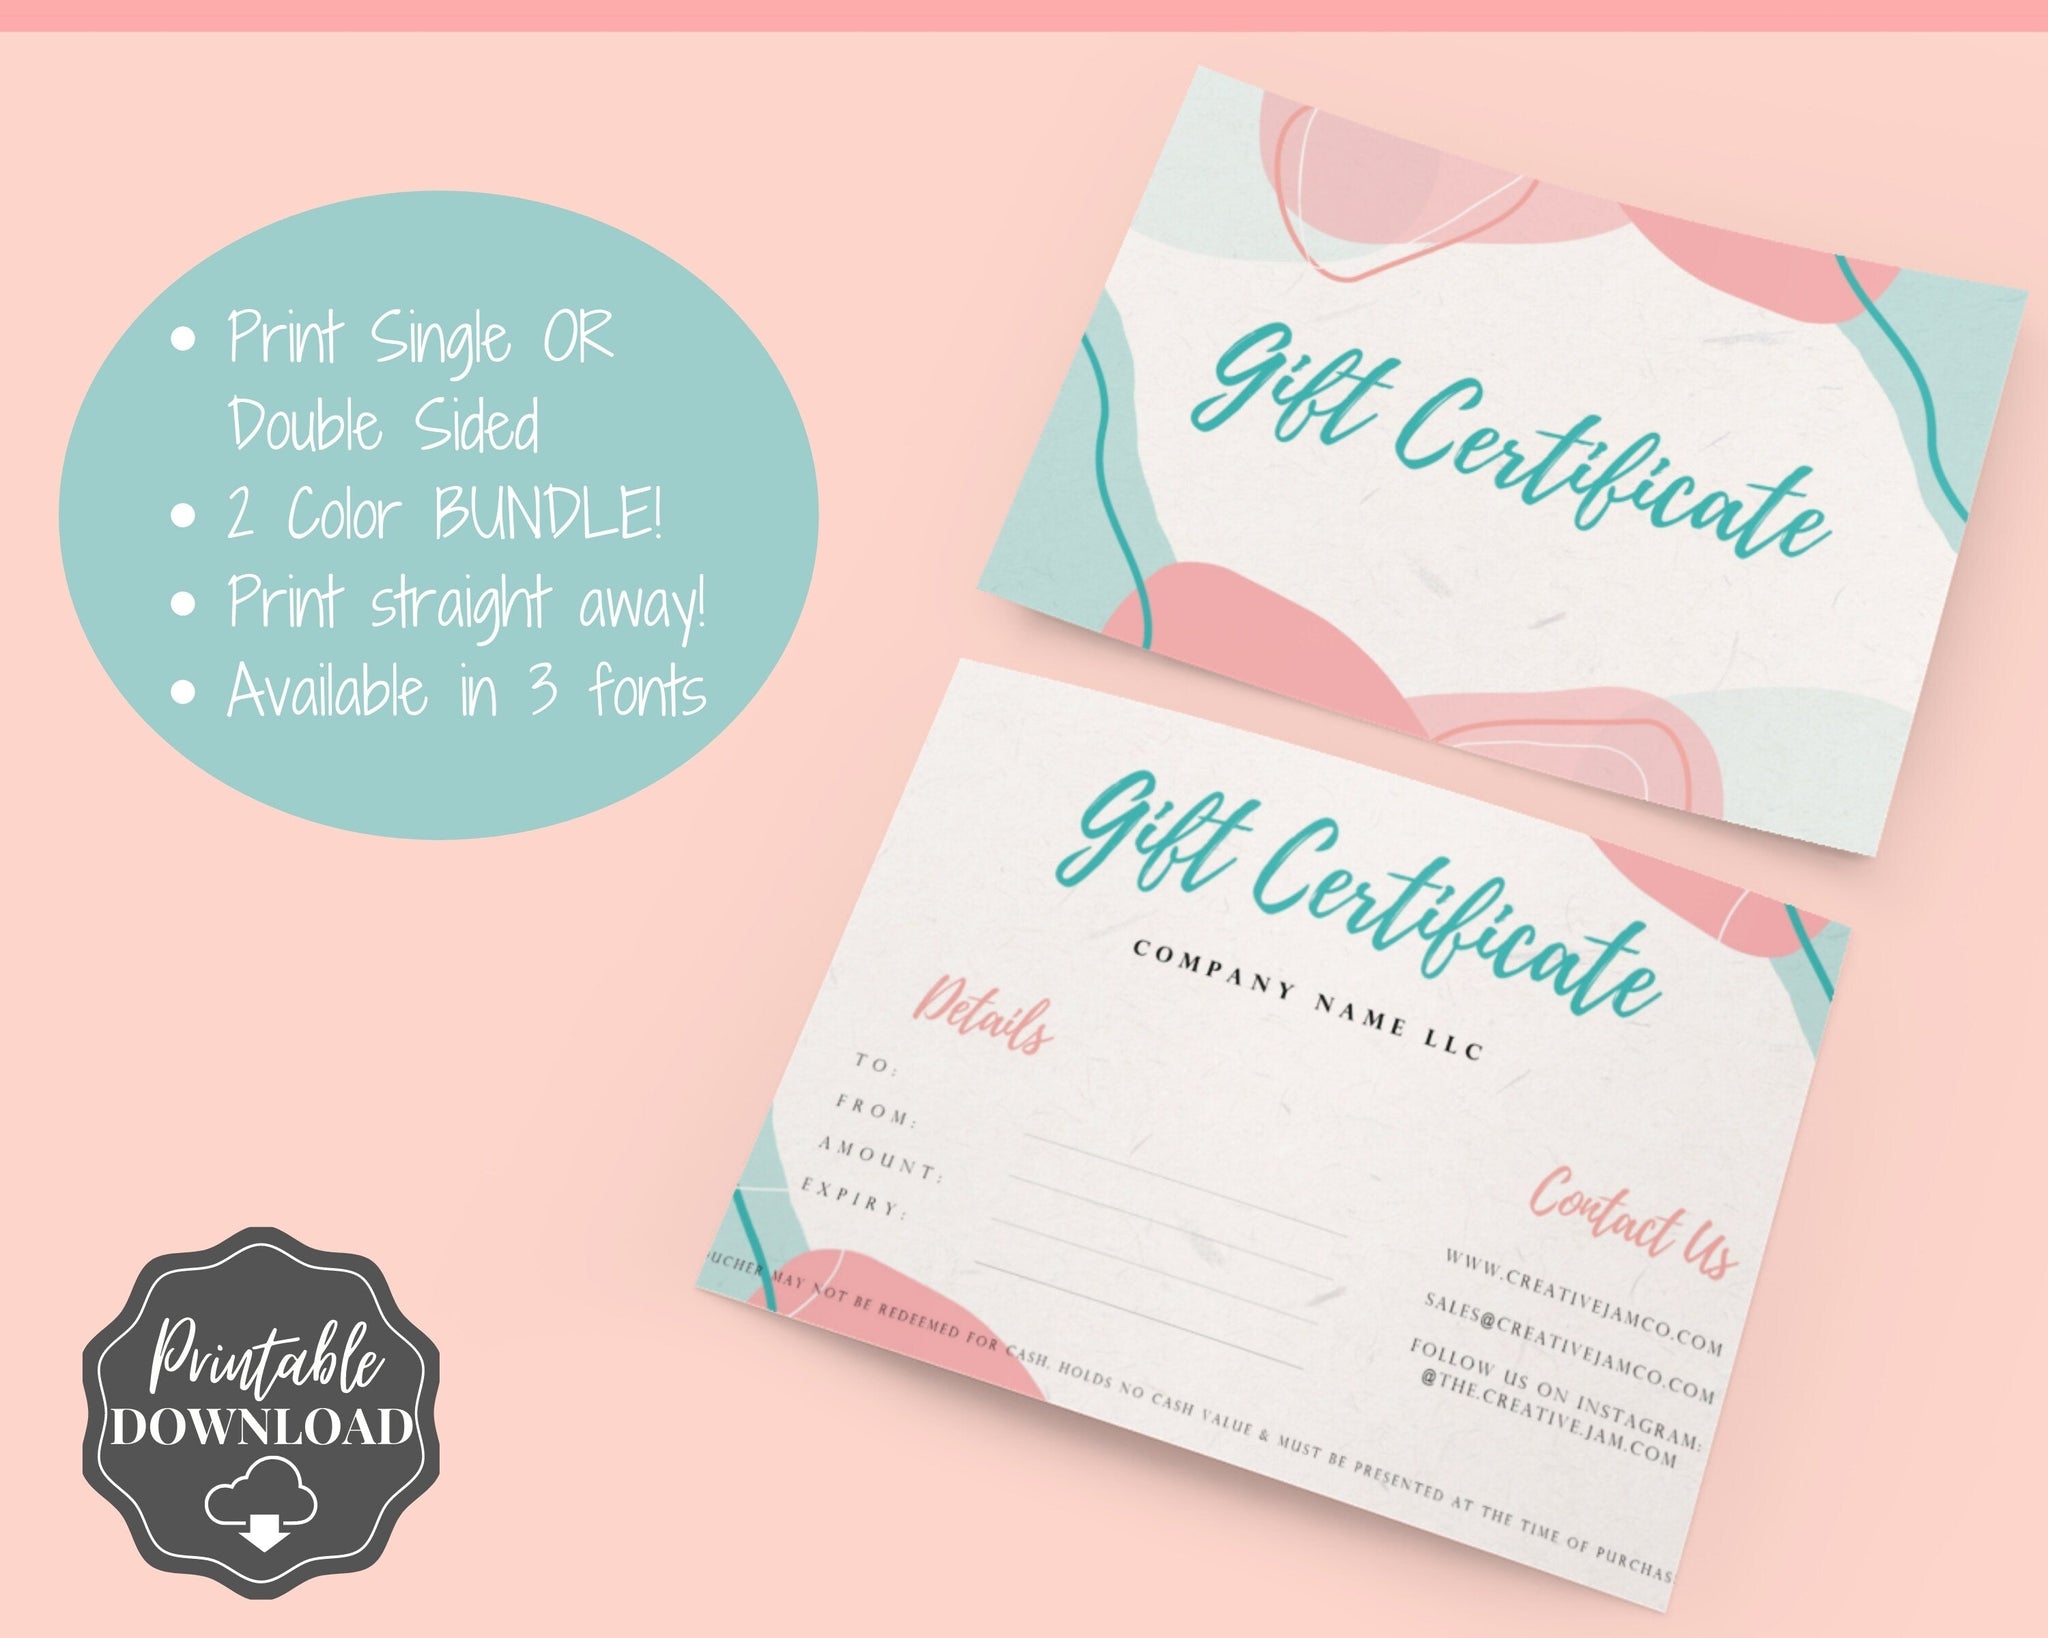 Gift Certificates, Custom Gift Cards Printing